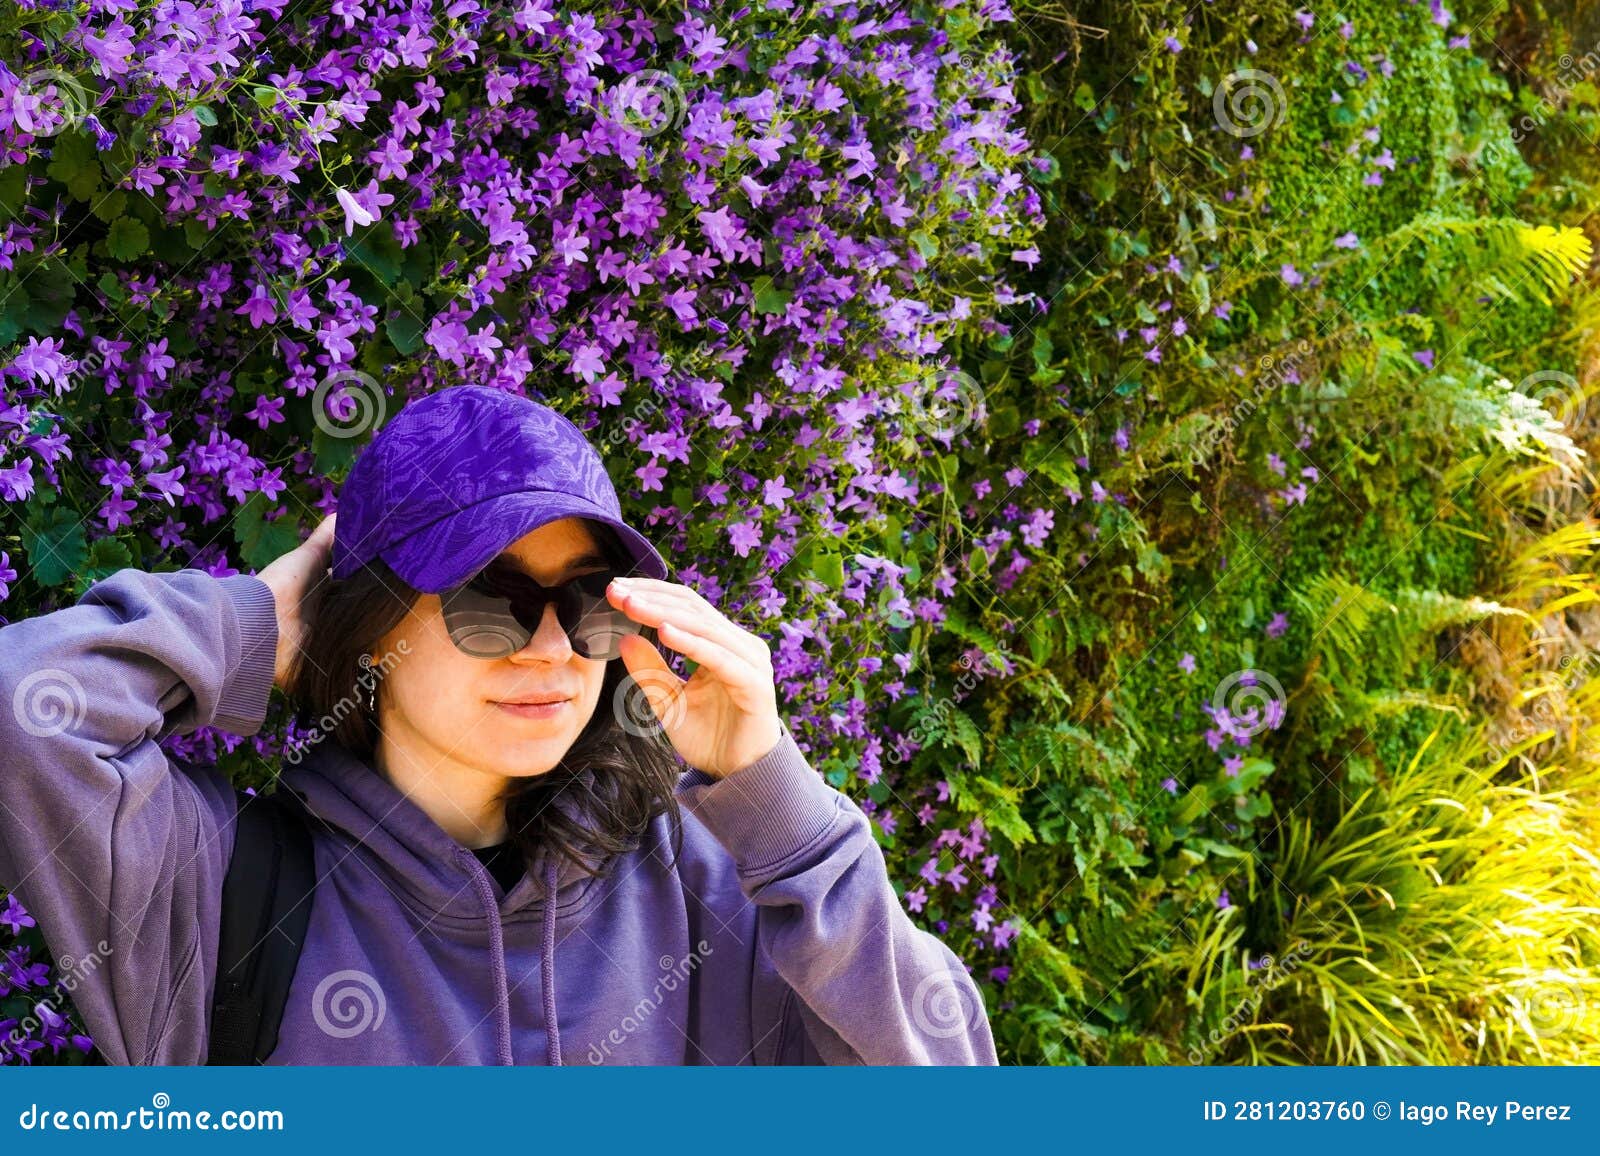 Girl Wearing Purple Clothes on a Purple Flowers Wall Stock Photo ...